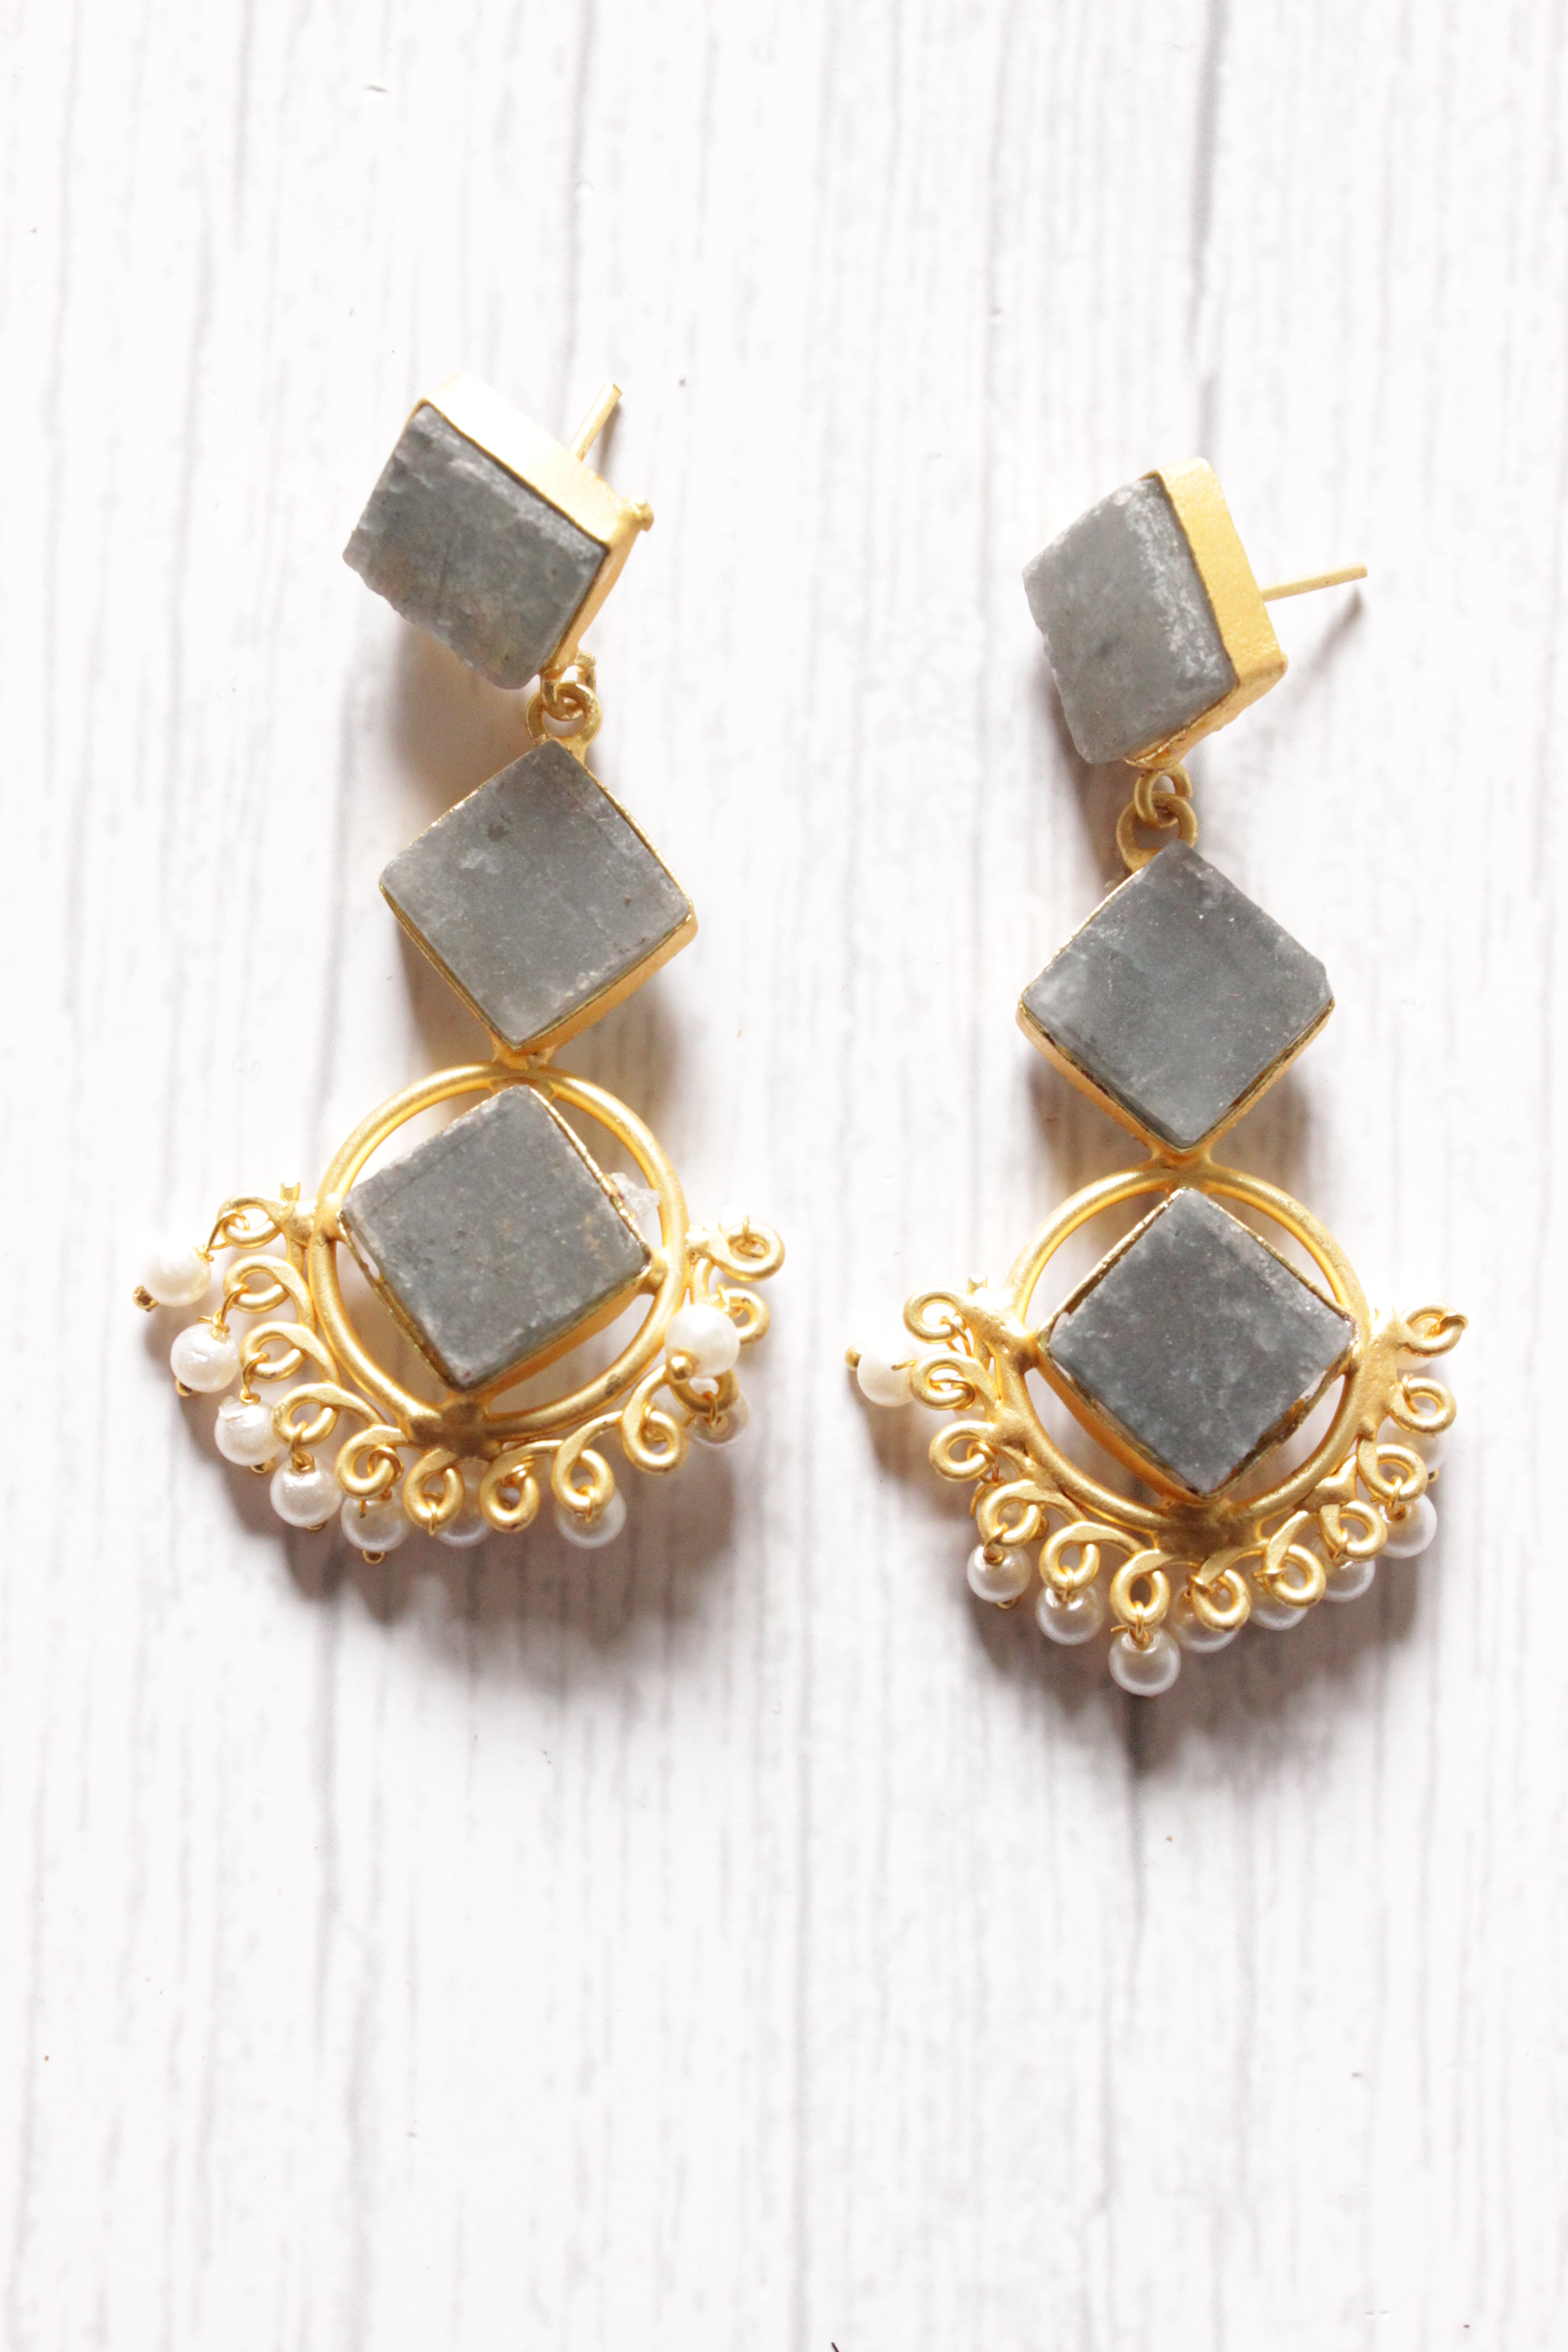 3 Layer Grey Teardrop Natural Stones Embedded Brass Dangler Earrings Embellished with White Beads